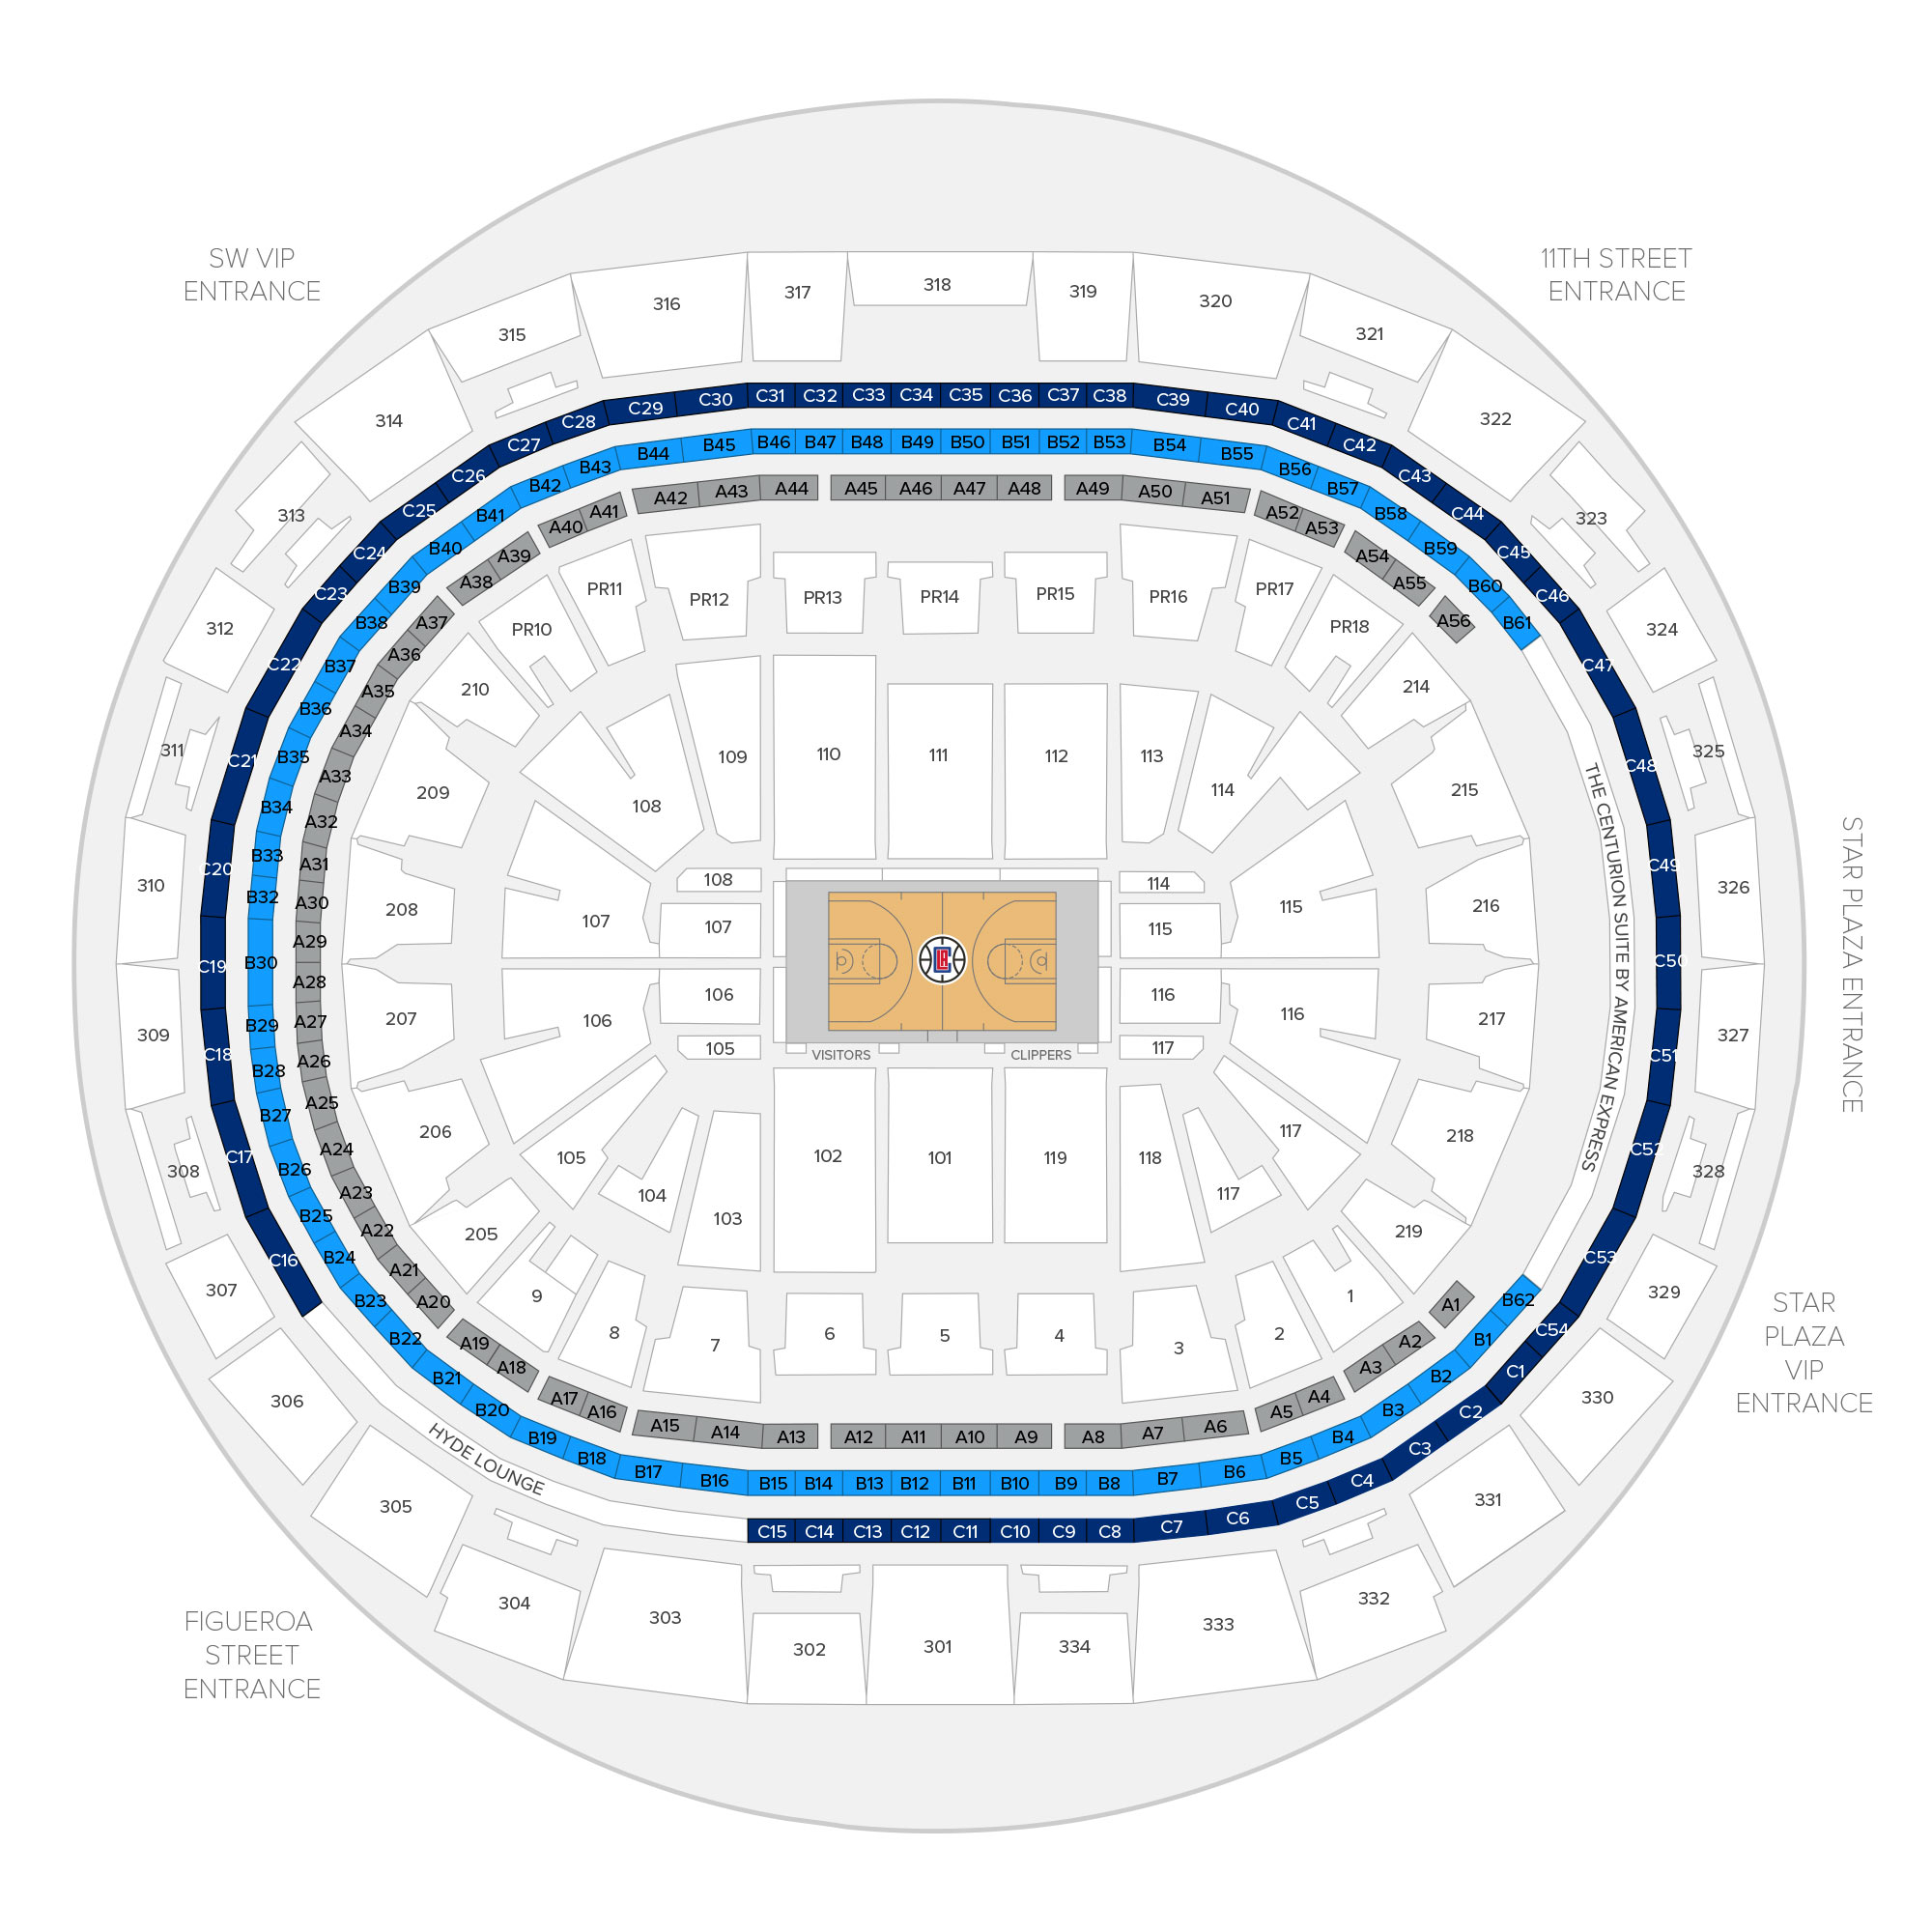 Crypto.com Arena (Formerly Staples Center) / Los Angeles Clippers Suite Map and Seating Chart